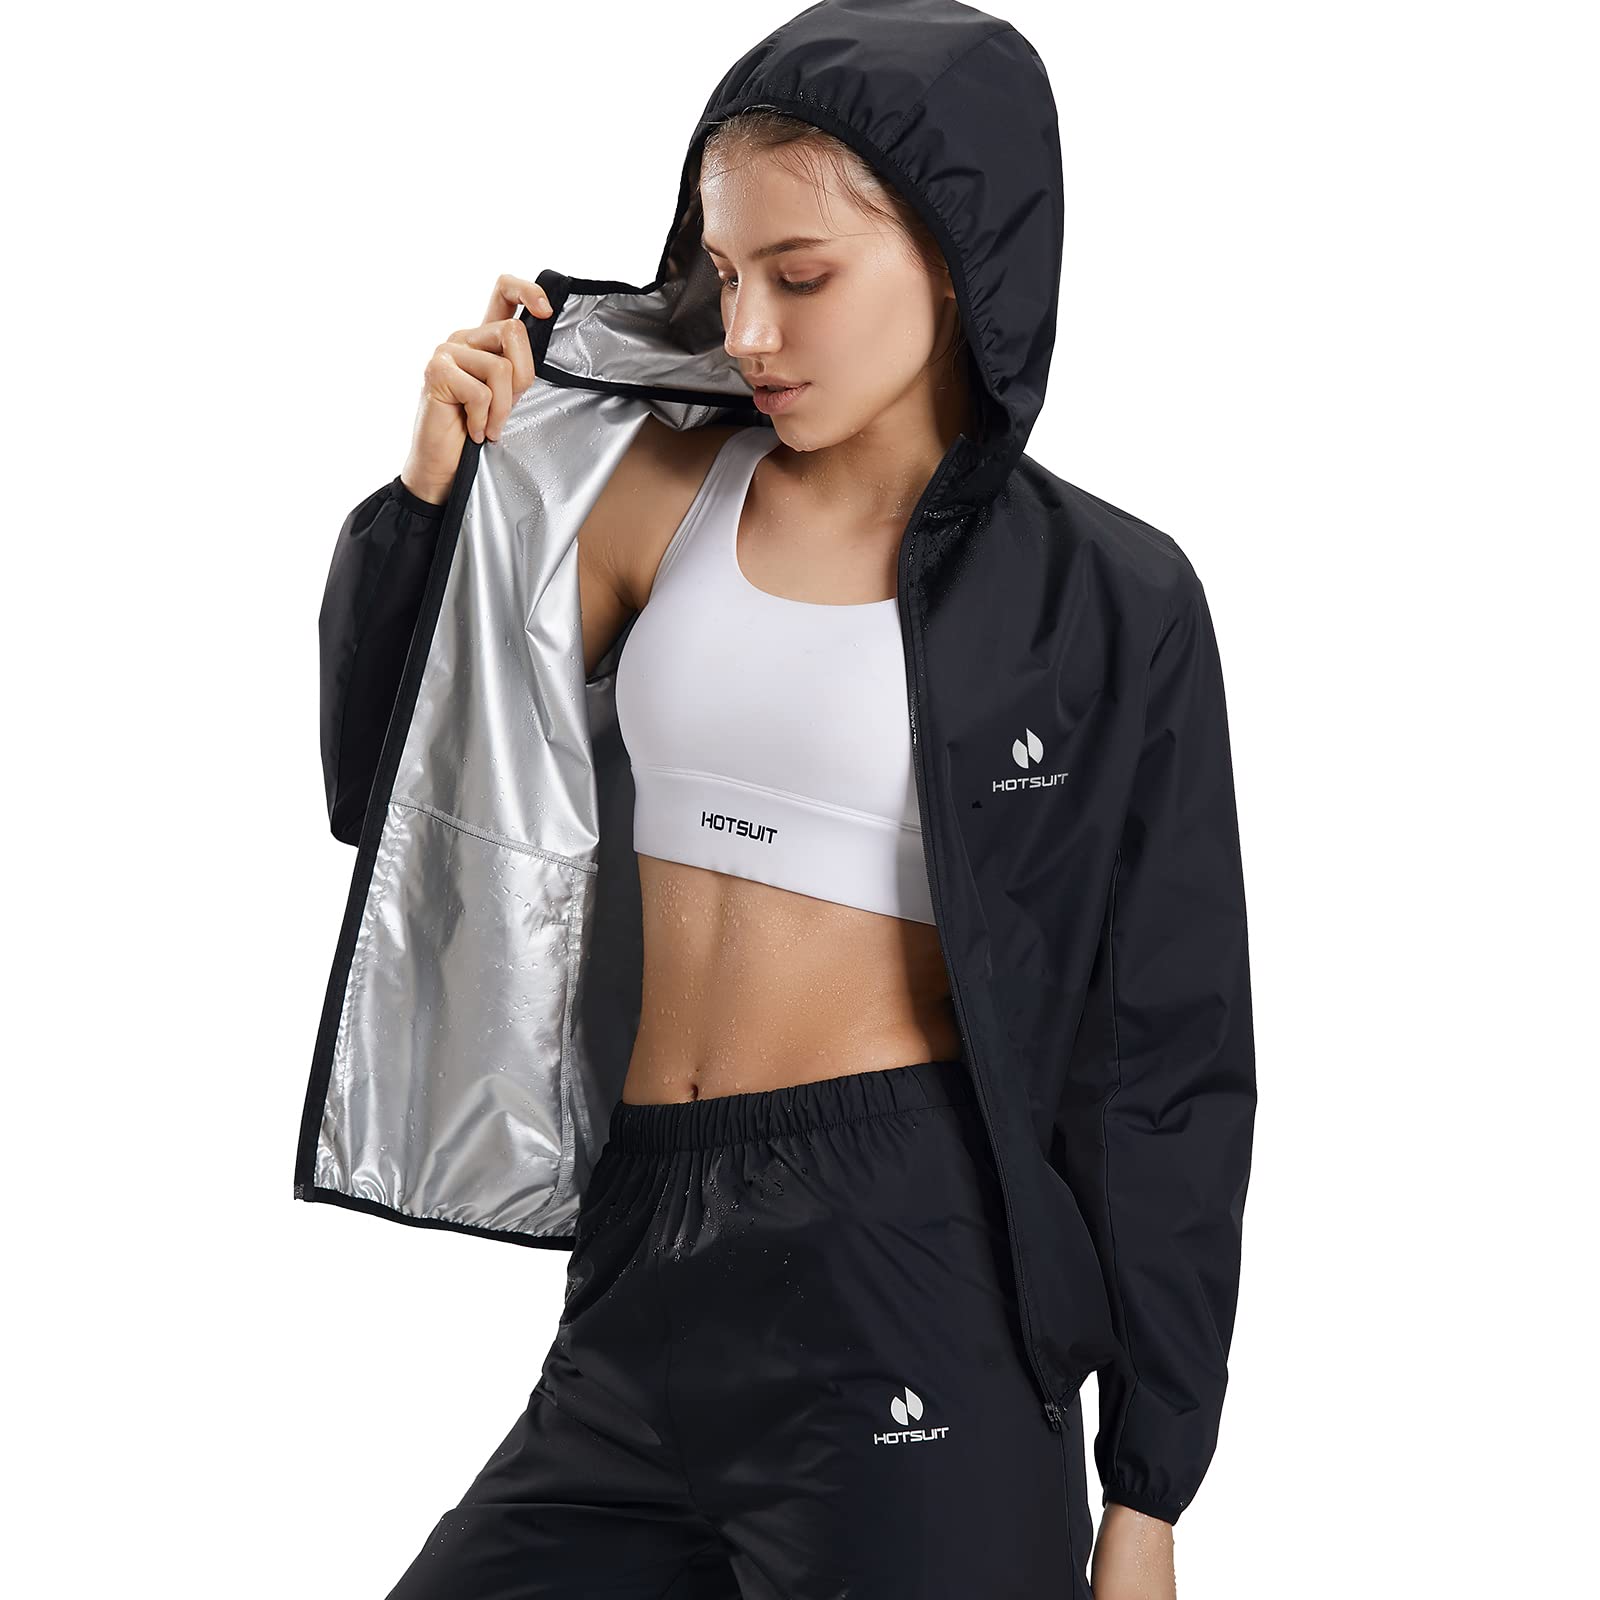 HOTSUIT Sauna Suit for Women Weight Loss Machine Washable Sweat Sauna Jacket Pants Anti Rip Sweat Suit for Gym Workout